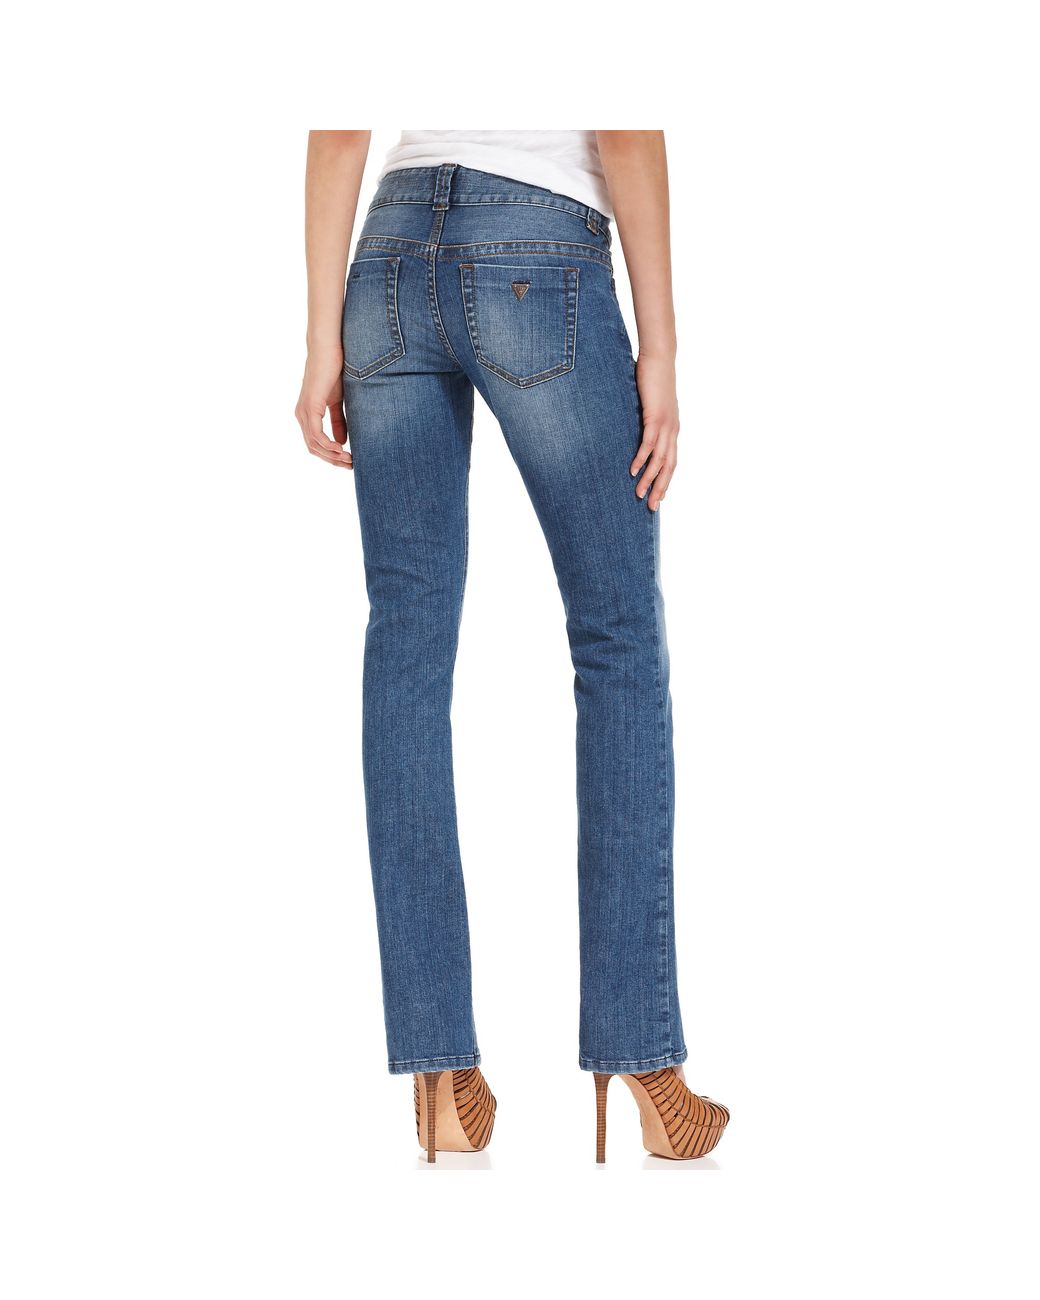 Guess Daredevil Bootcut Jeans in Blue | Lyst